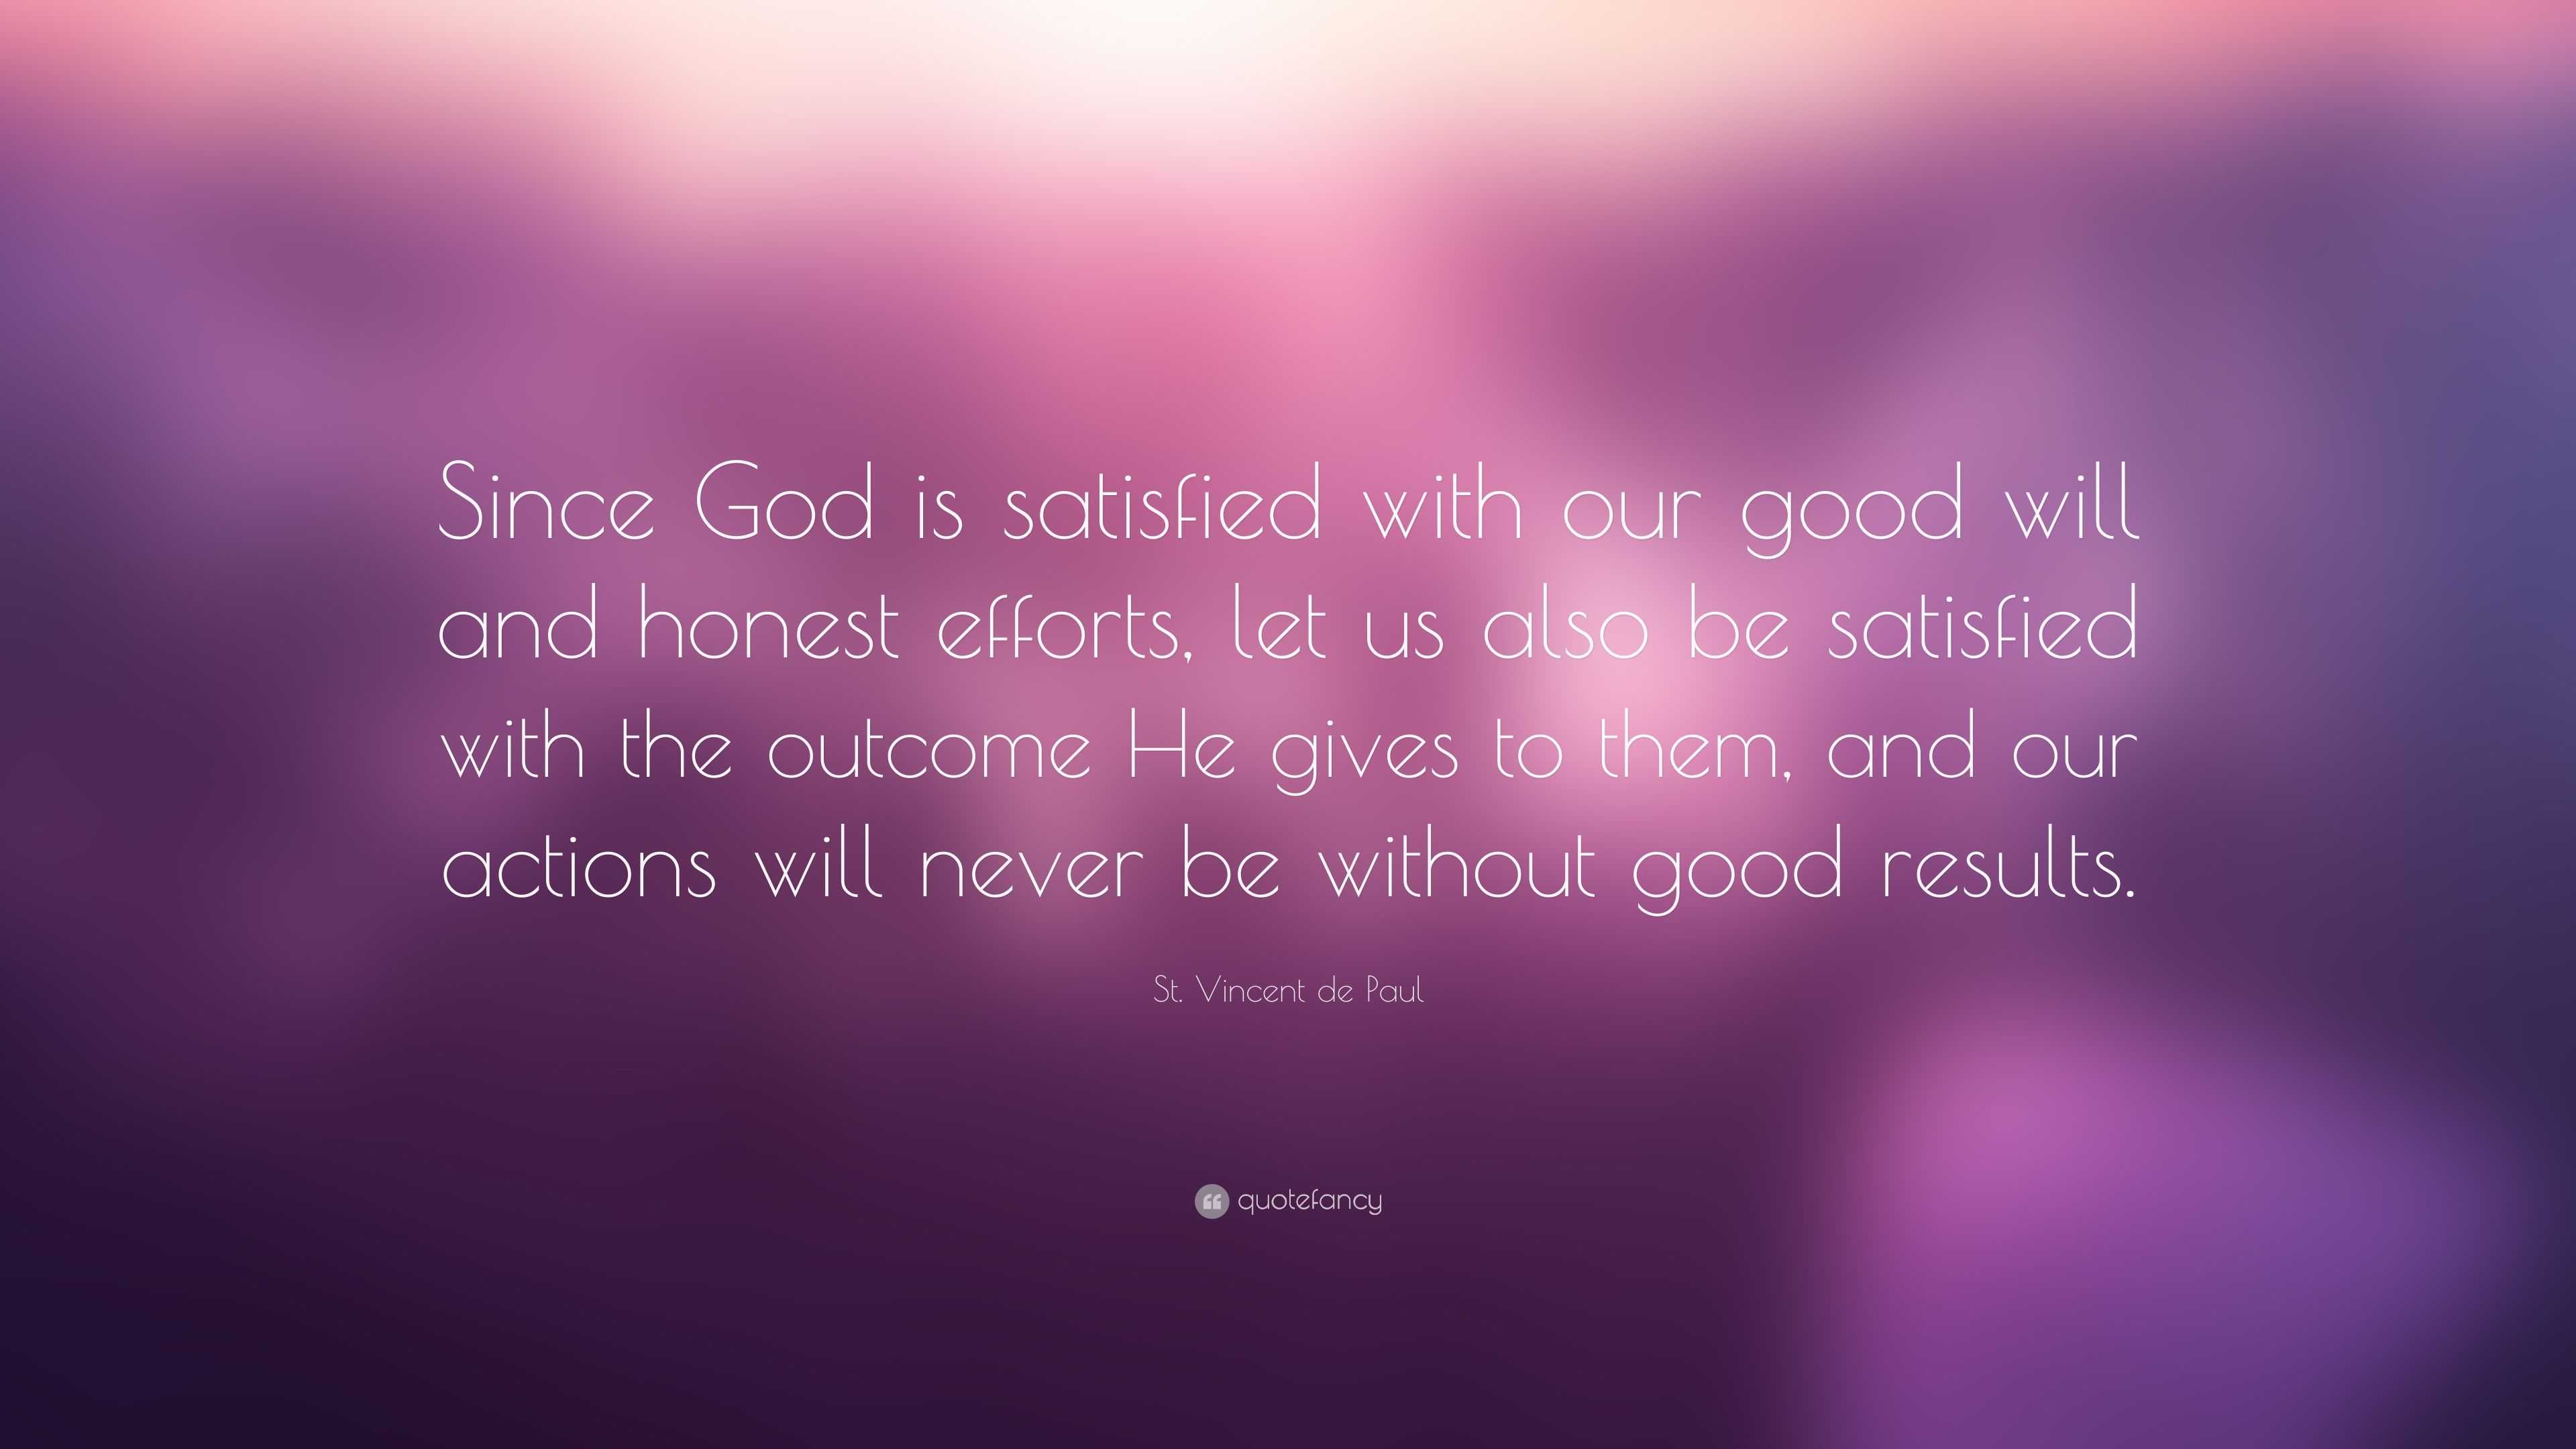 St. Vincent de Paul Quote: “Since God is satisfied with our good will ...